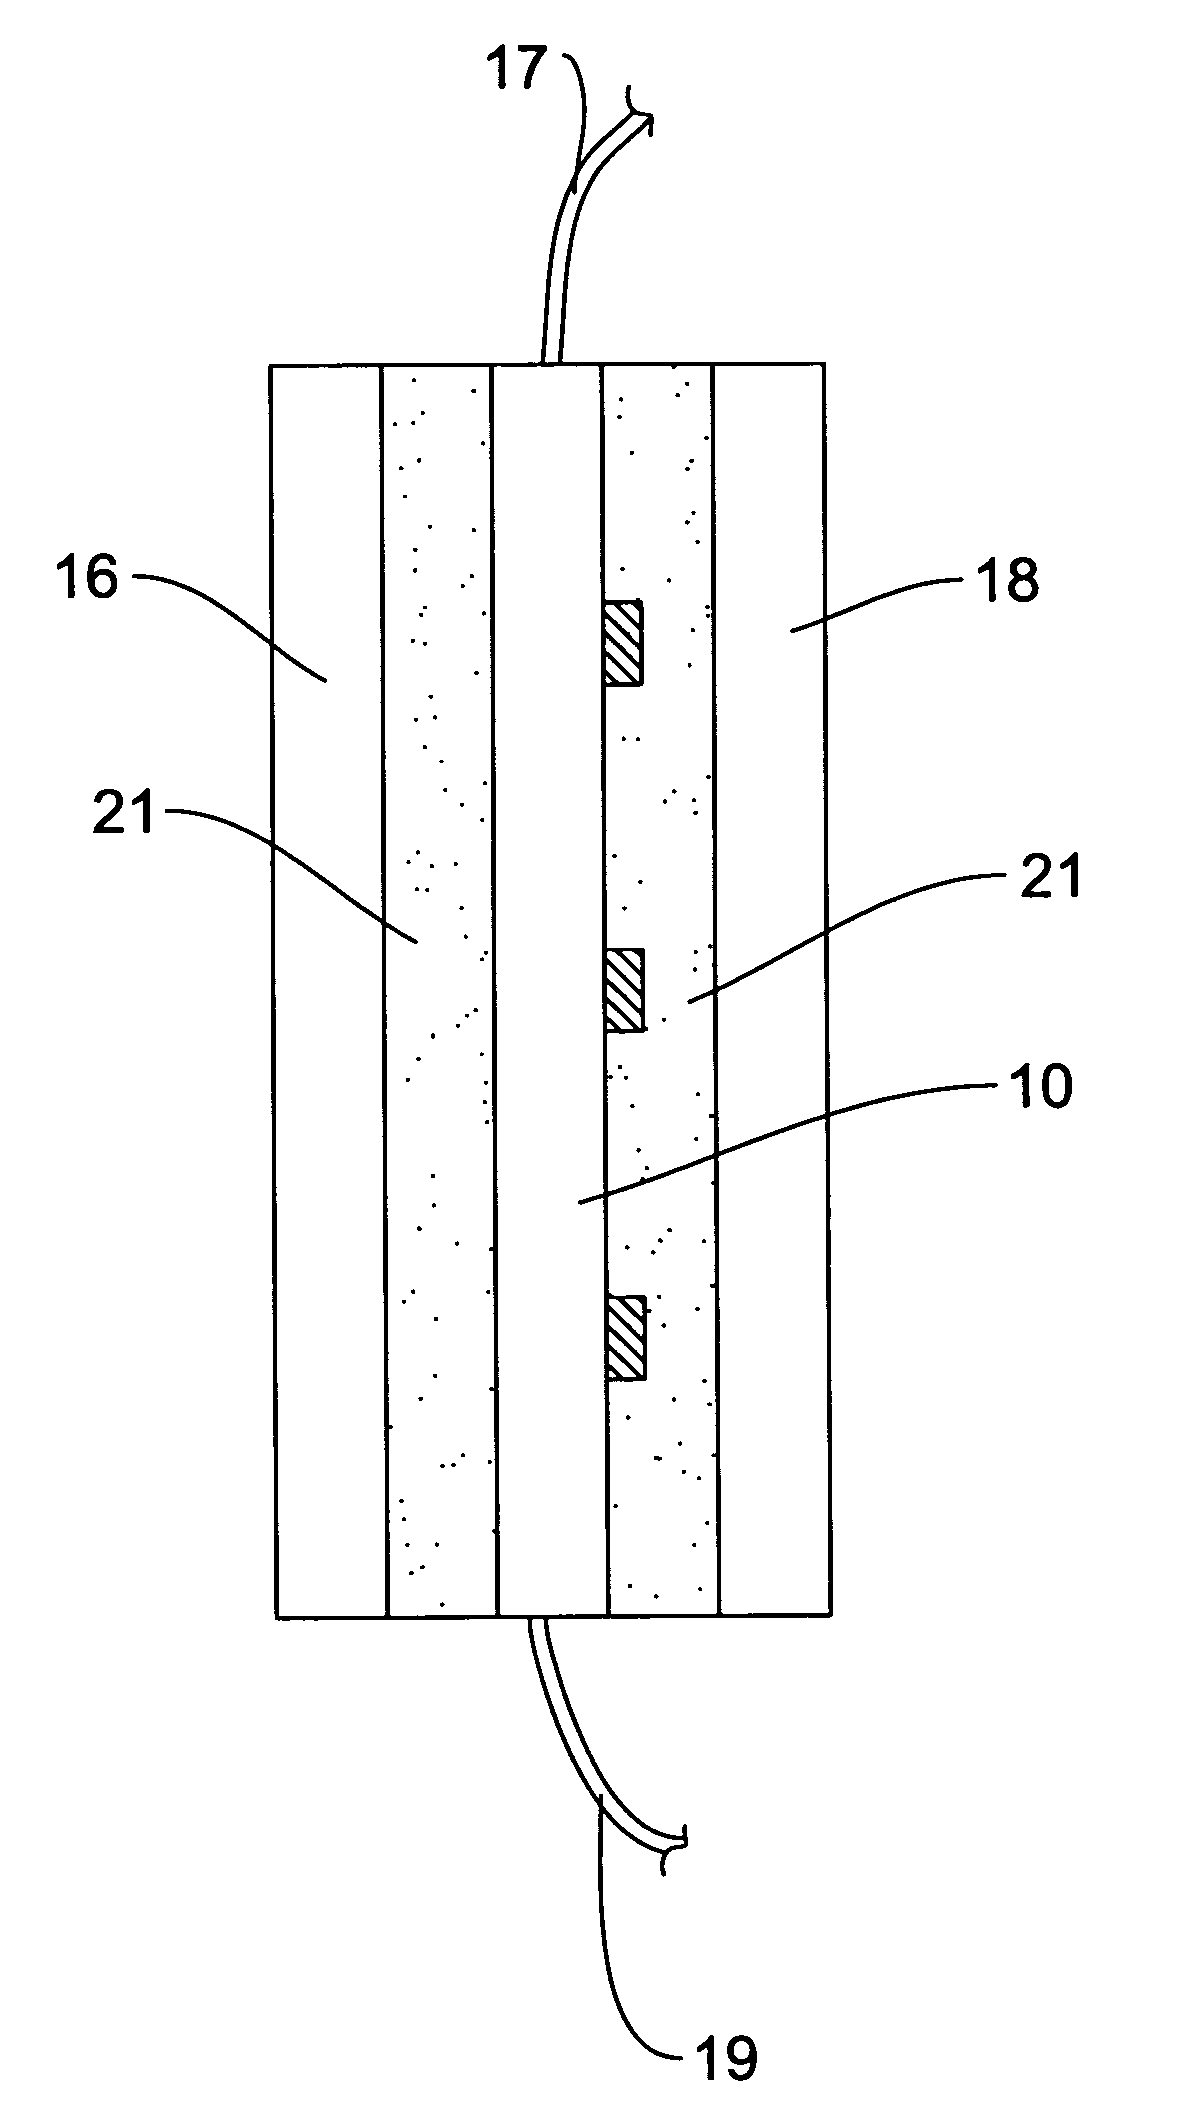 LED lighting apparatus with transparent flexible circuit structure